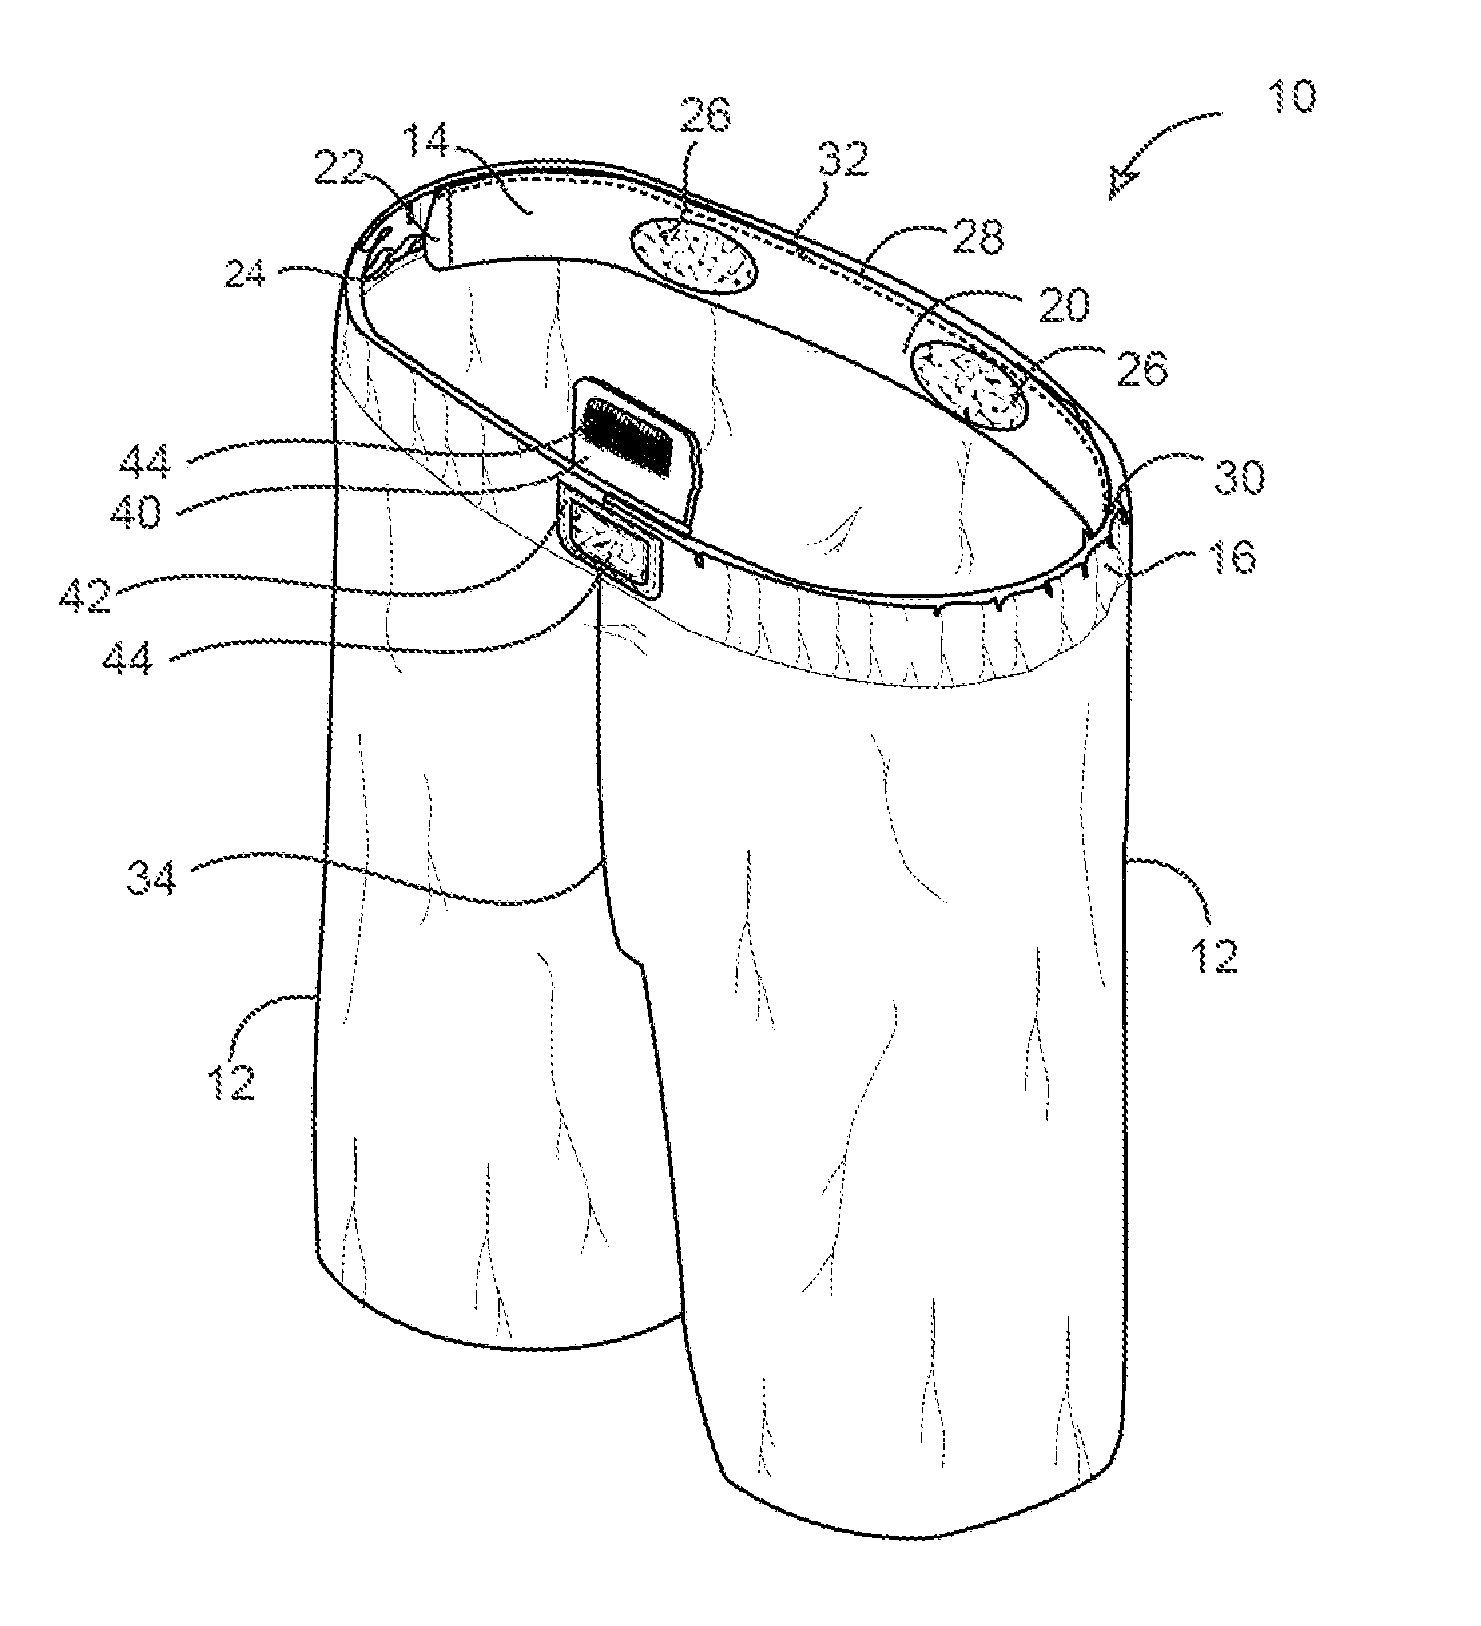 Lower-body garment having a secure waist assembly